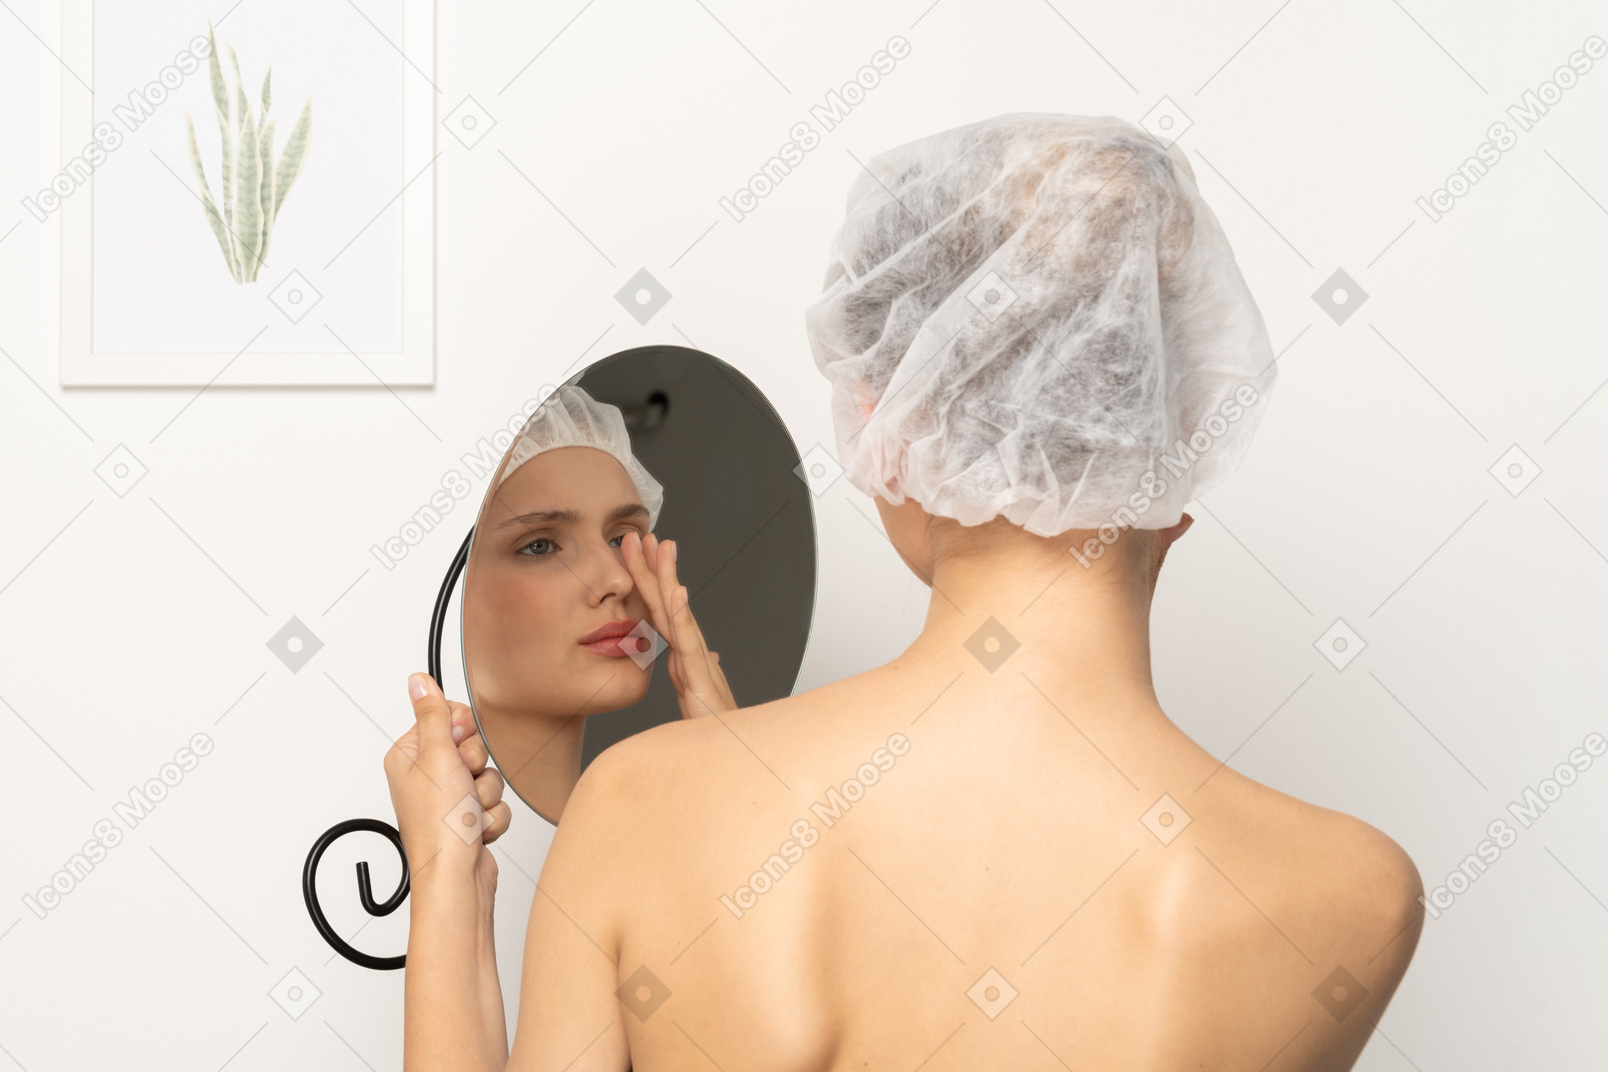 Insecure woman in medical cap looking at her reflection in the mirror